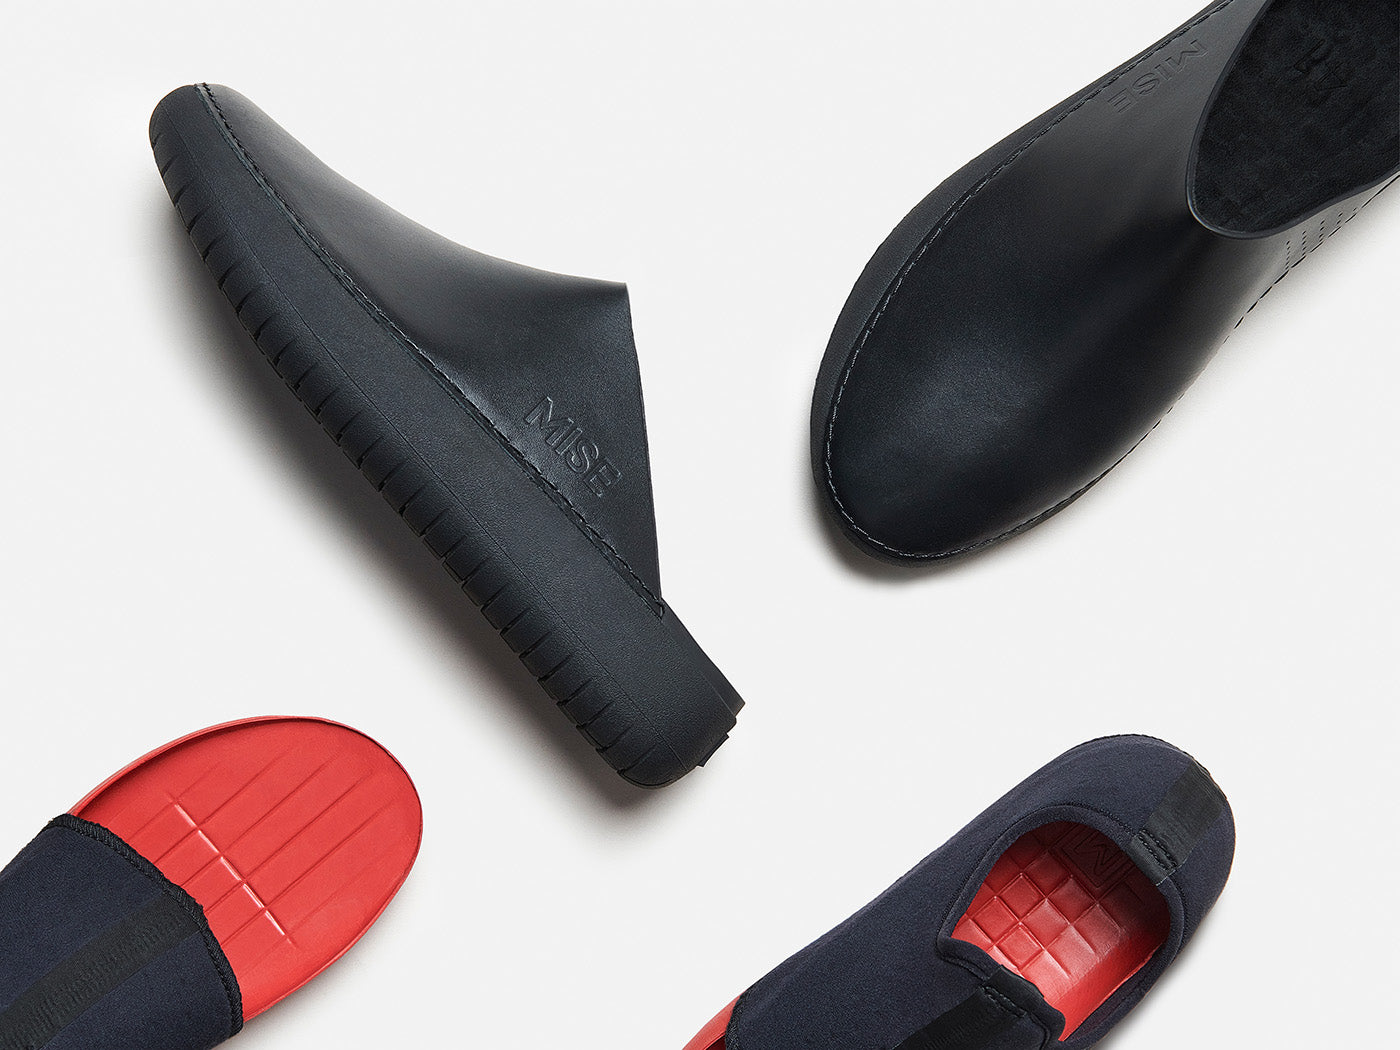 Shop MISE kitchen shoes designed for culinary professionals.